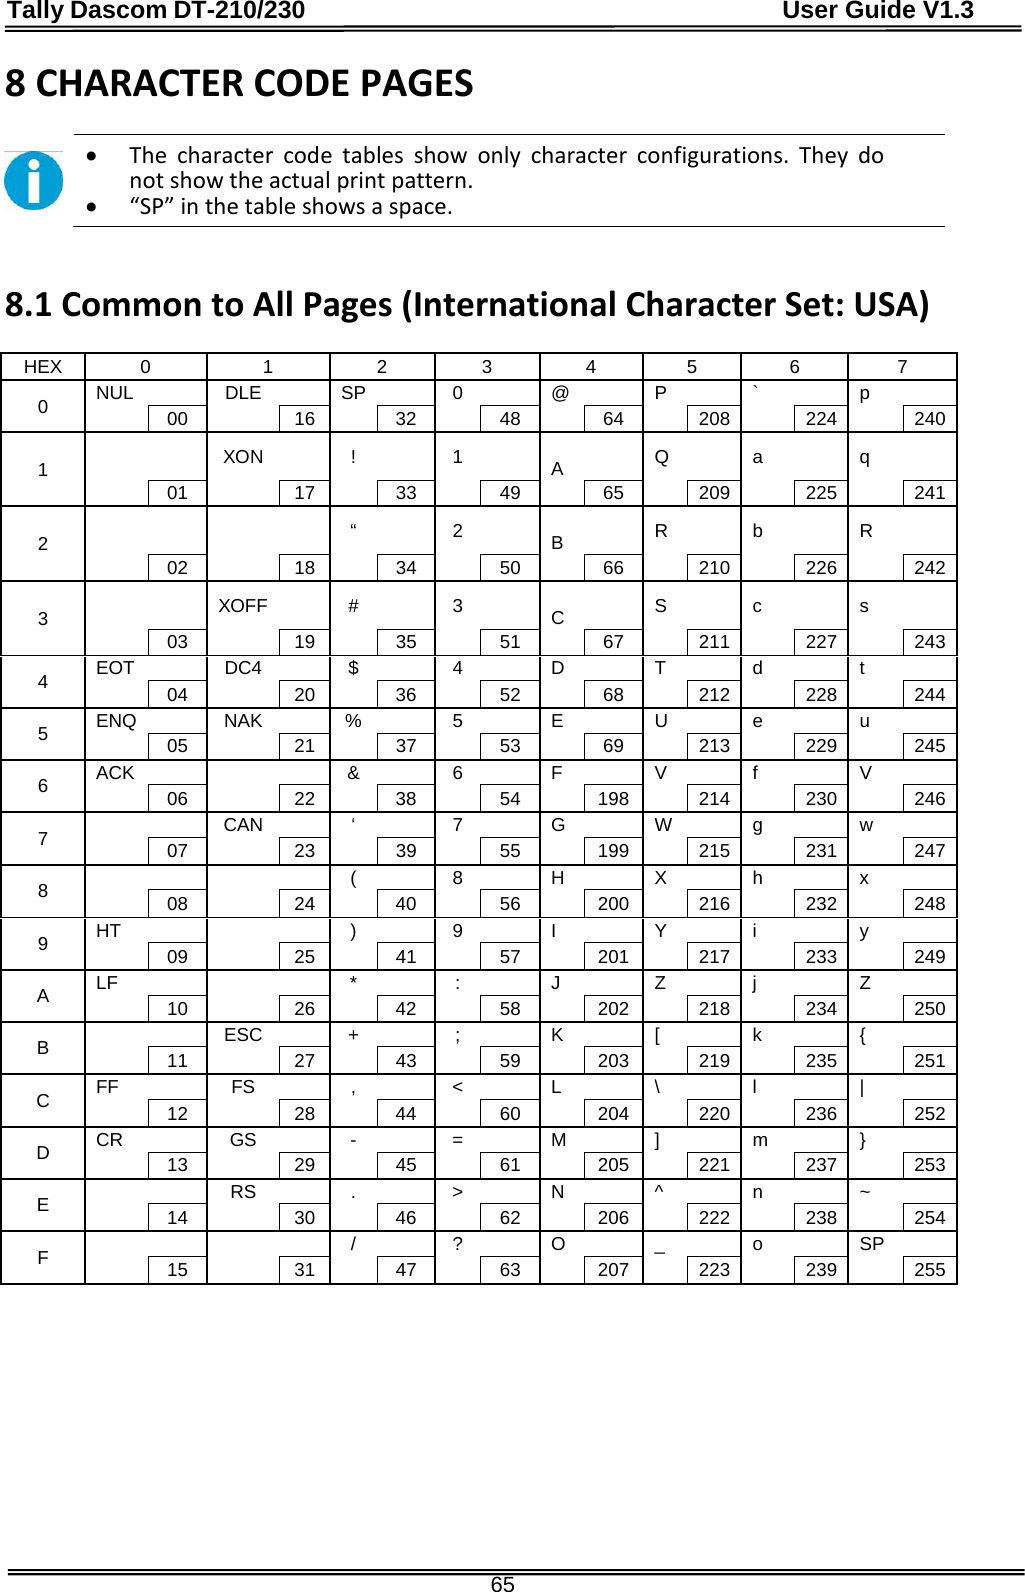 Tally Dascom DT-210/230                                      User Guide V1.3  65 8 CHARACTER CODE PAGES   • The character code tables show only character configurations. They do not show the actual print pattern. • “SP” in the table shows a space.   8.1 Common to All Pages (International Character Set: USA)  HEX  0  1  2  3  4  5  6  7 0 NUL    DLE    SP    0    @    P    `    p      00  16   32  48   64  208   224  240 1      XON     !     1     A    Q     a     q      01   17   33   49   65   209   225   241 2          “     2     B    R     b     R      02  18   34  50   66  210   226  242 3      XOFF     #     3     C    S     c     s      03   19   35   51   67   211   227   243 4 EOT    DC4   $    4   D    T   d    t     04  20   36  52   68  212   228  244 5  ENQ    NAK     %     5     E     U     e     u      05   21   37   53   69   213   229   245 6 ACK       &amp;    6   F    V   f    V     06  22   38  54   198  214   230  246 7      CAN    ‘    7    G    W    g    w      07   23   39   55   199   215   231   247 8         (    8   H    X   h    x     08  24   40  56   200  216   232  248 9 HT        )    9    I    Y    i    y      09   25   41   57   201   217   233   249 A LF       *    :   J    Z   j    Z     10  26   42  58   202  218   234  250 B      ESC    +    ;    K    [    k    {      11   27   43   59   203   219   235    251 C FF    FS   ,    &lt;   L    \   l    |     12  28   44  60   204  220   236  252 D  CR    GS     -     =     M     ]     m     }      13   29   45   61   205   221   237   253 E      RS   .    &gt;   N    ^   n    ~     14  30   46  62   206  222   238  254 F          /    ?    O    _    o    SP      15   31   47   63   207   223   239   255      